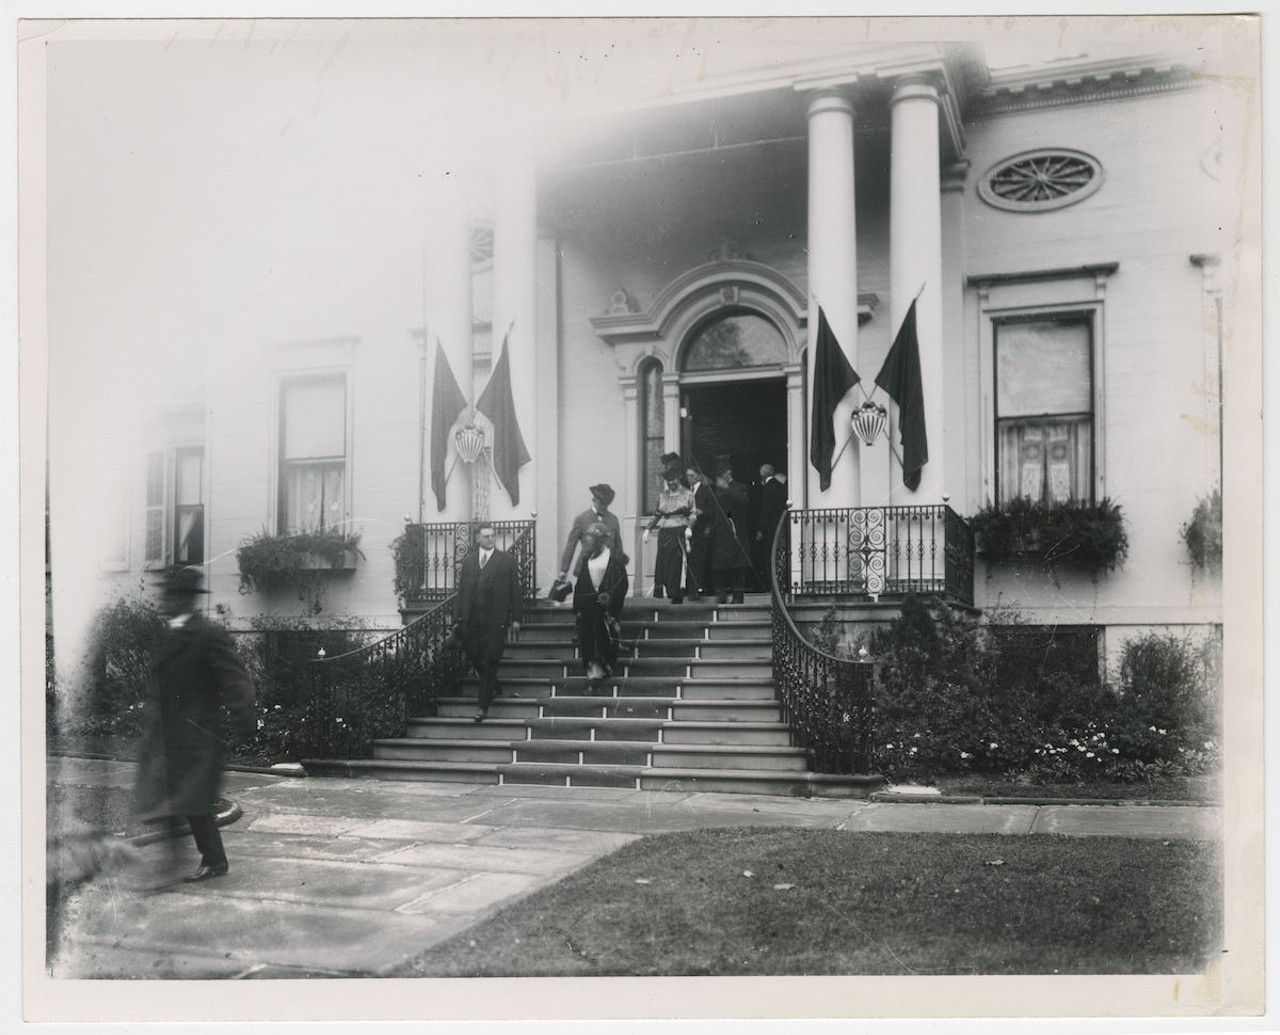 People exiting Taft house, now the Taft Museum of Art, date unknown